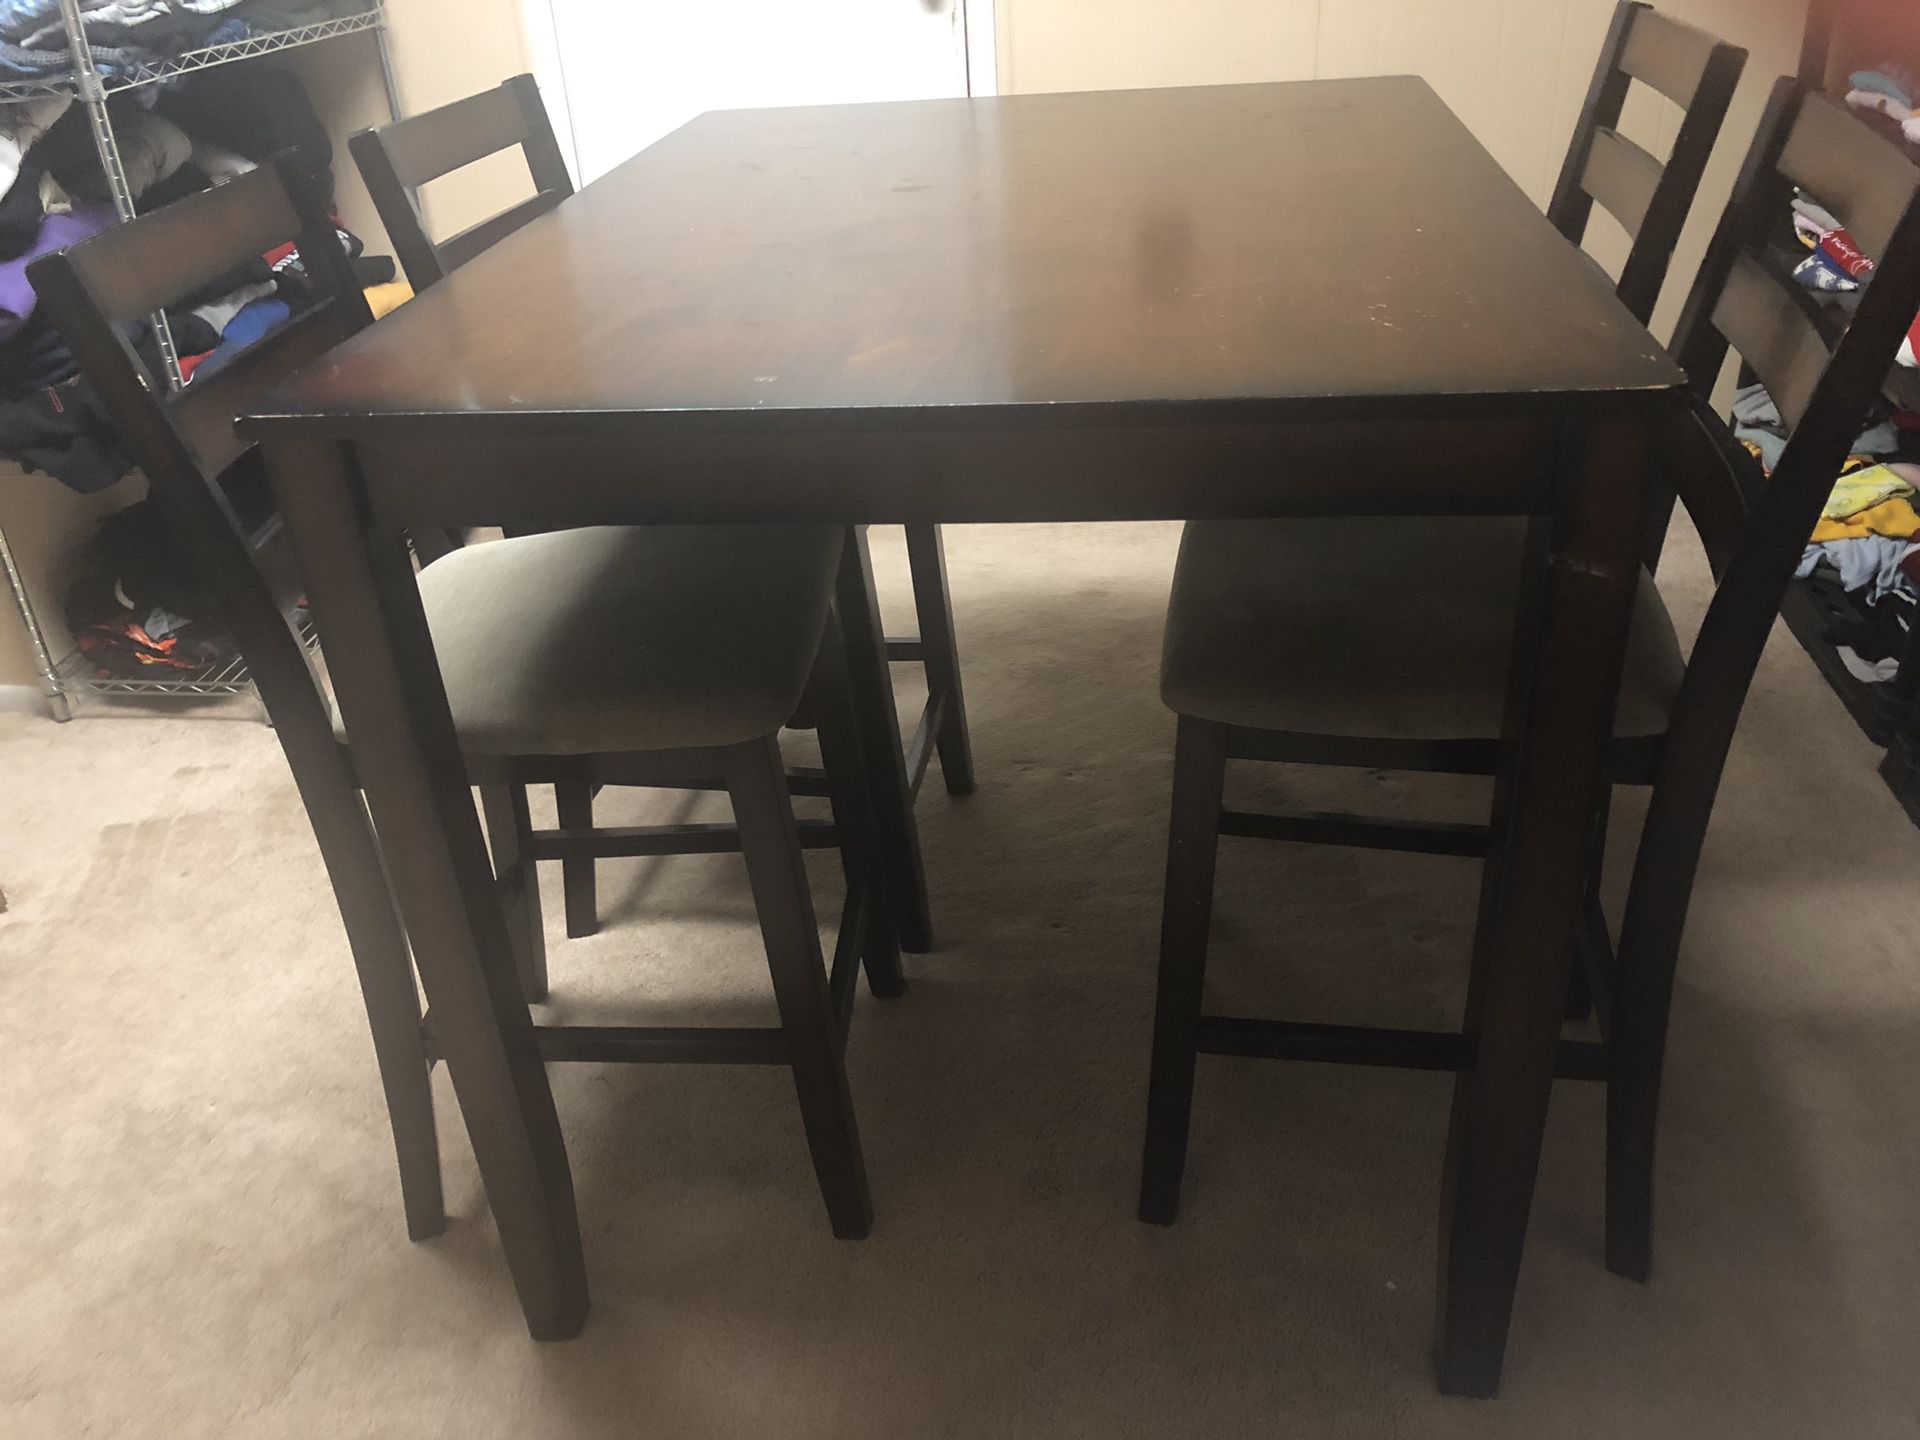 Dining Room Table and Chair Set